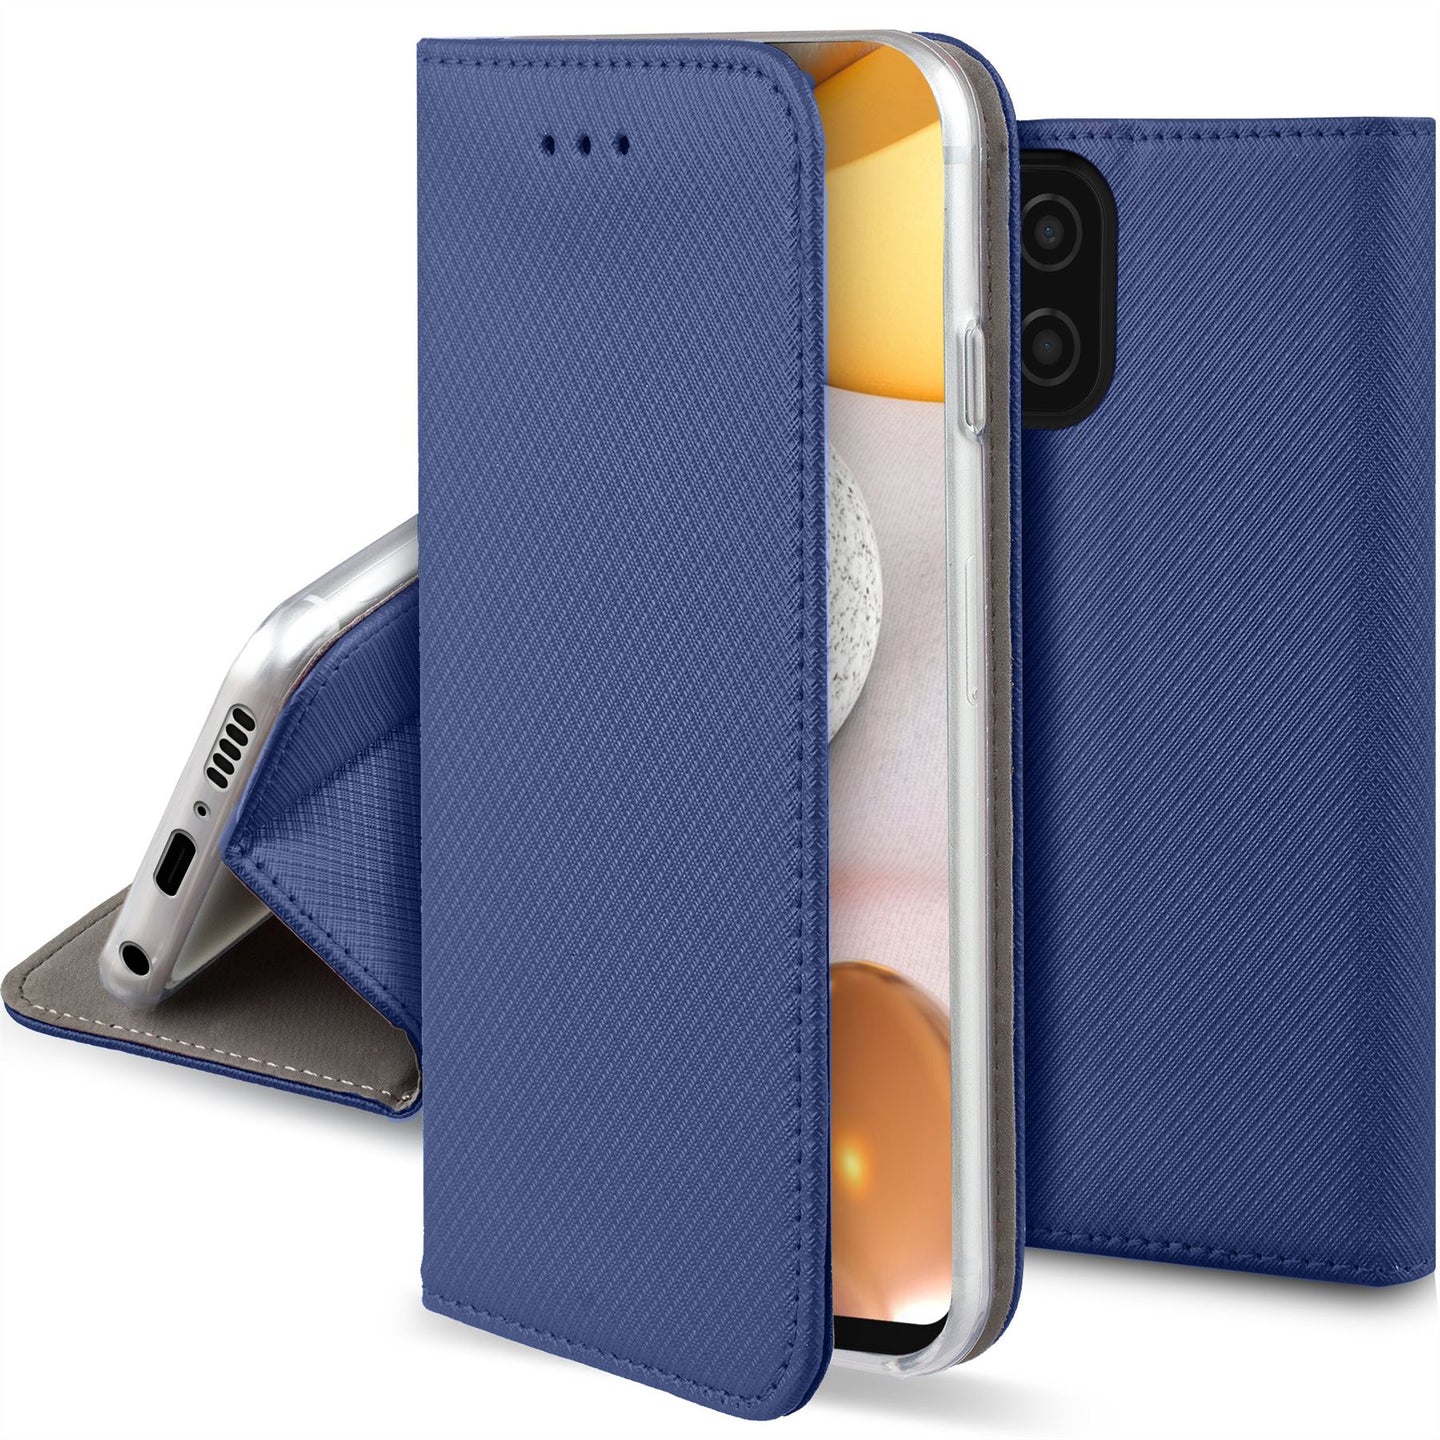 Moozy Case Flip Cover for Samsung A42 5G, Dark Blue - Smart Magnetic Flip Case with Card Holder and Stand